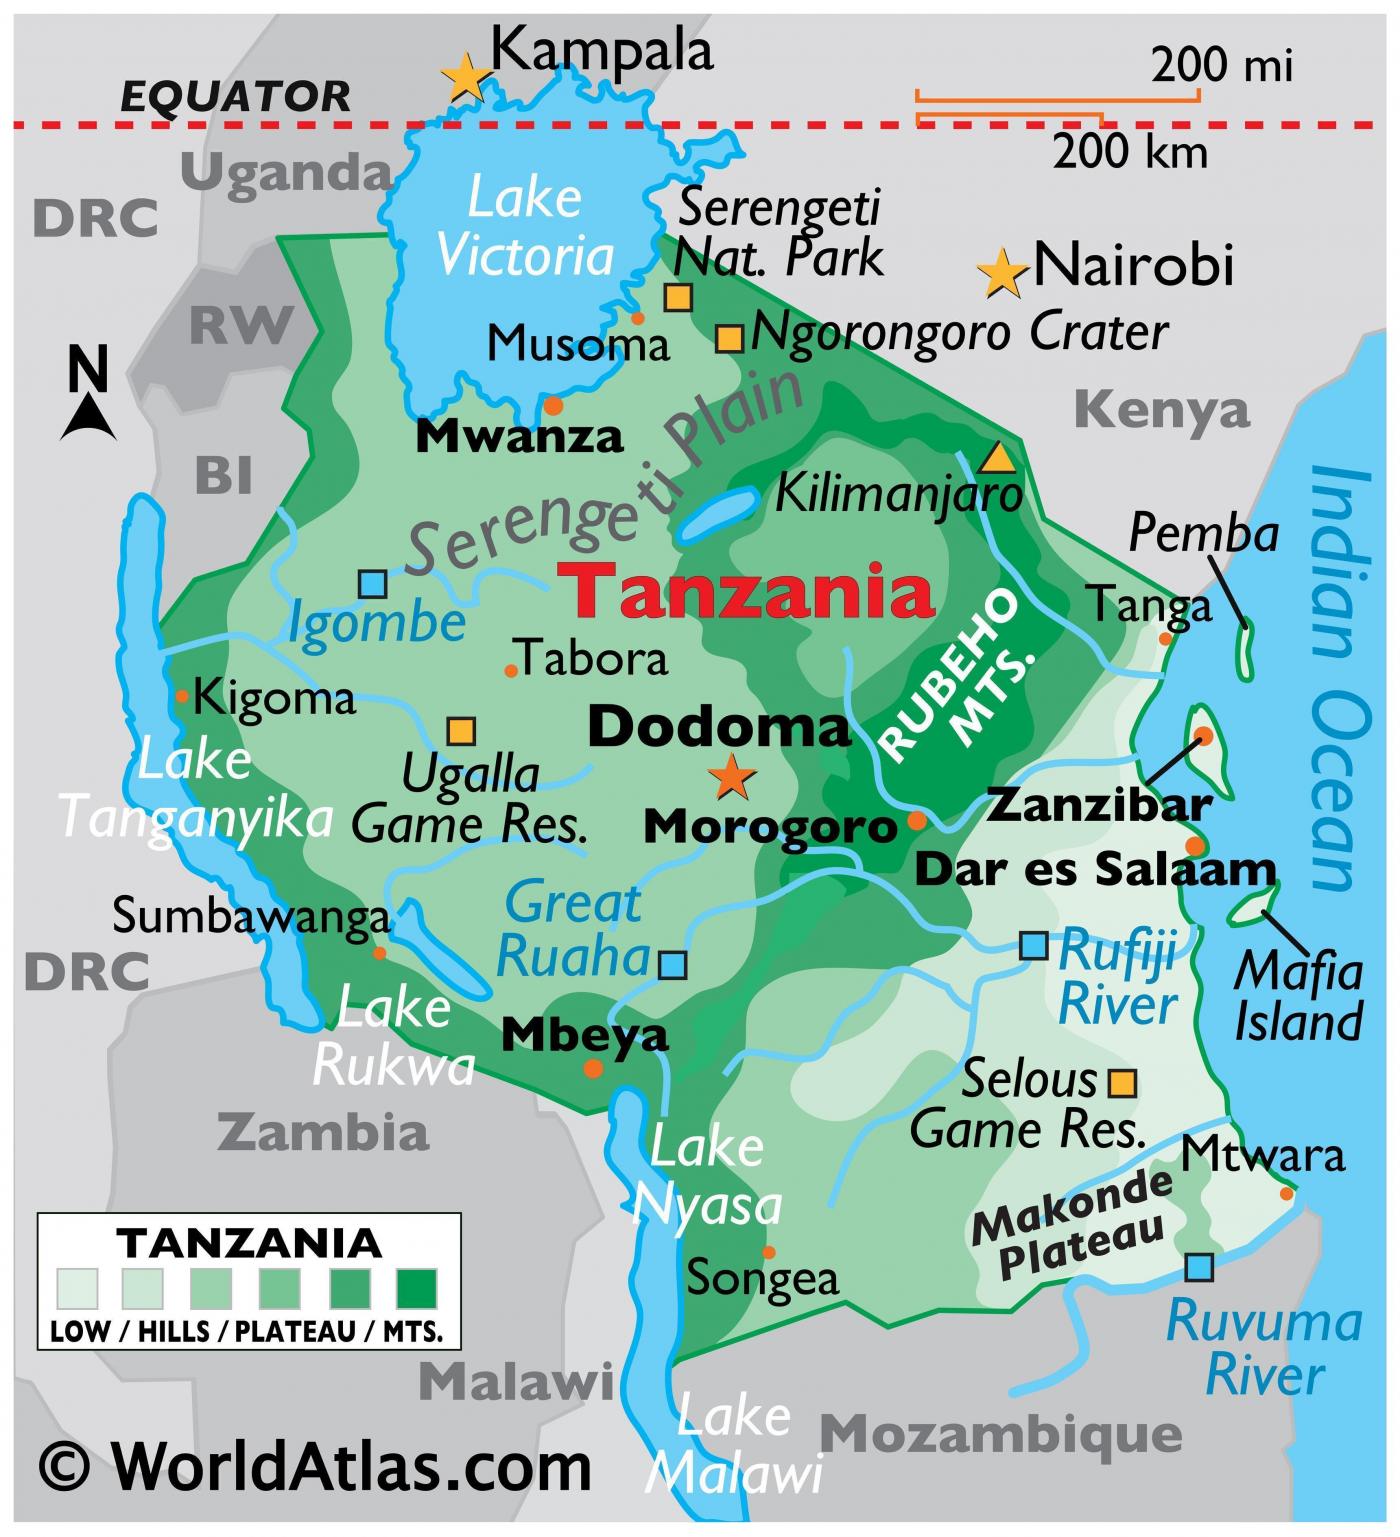 A map of Tanzania, showing the different regions of the country